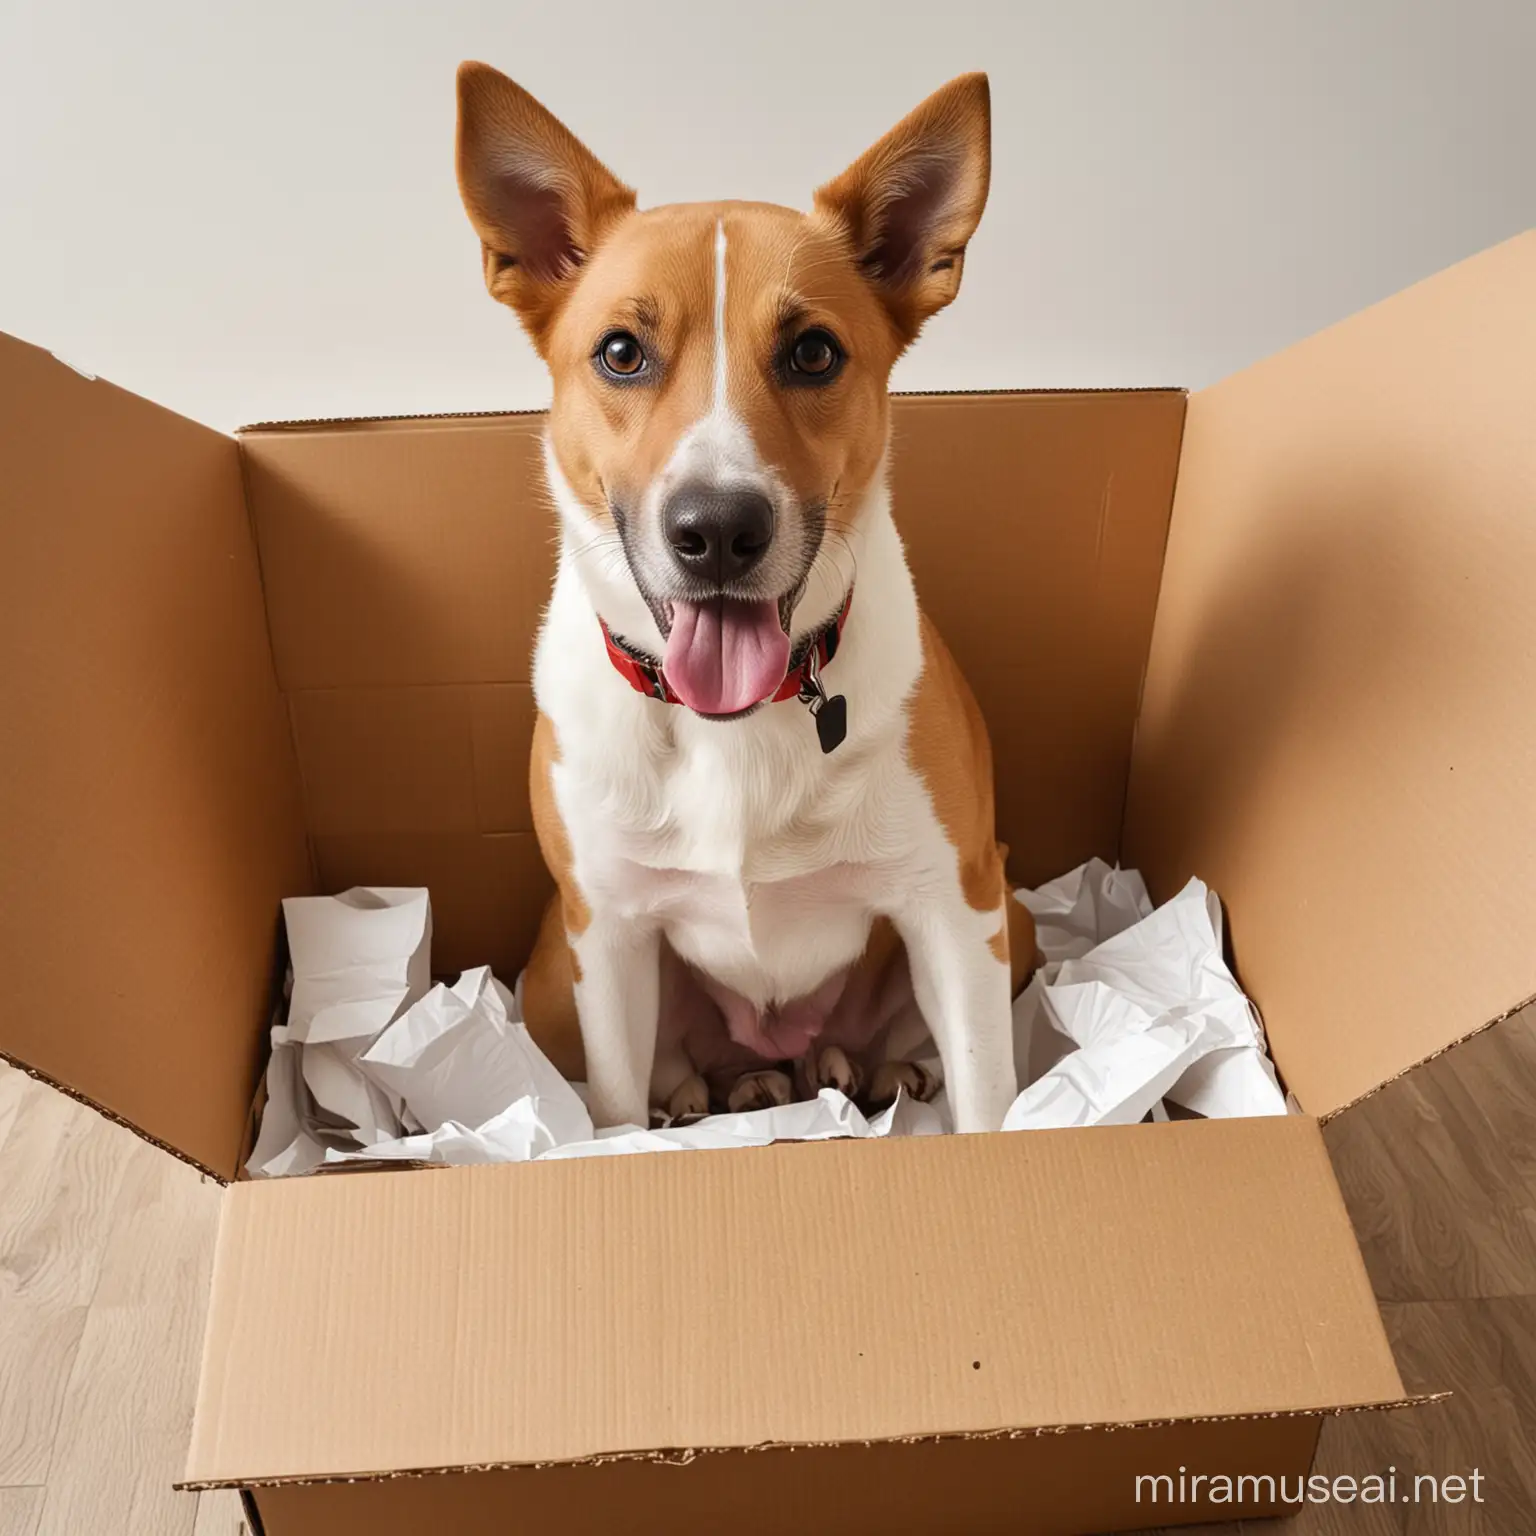 Playful Dog Excitedly Unboxing Cardboard Package